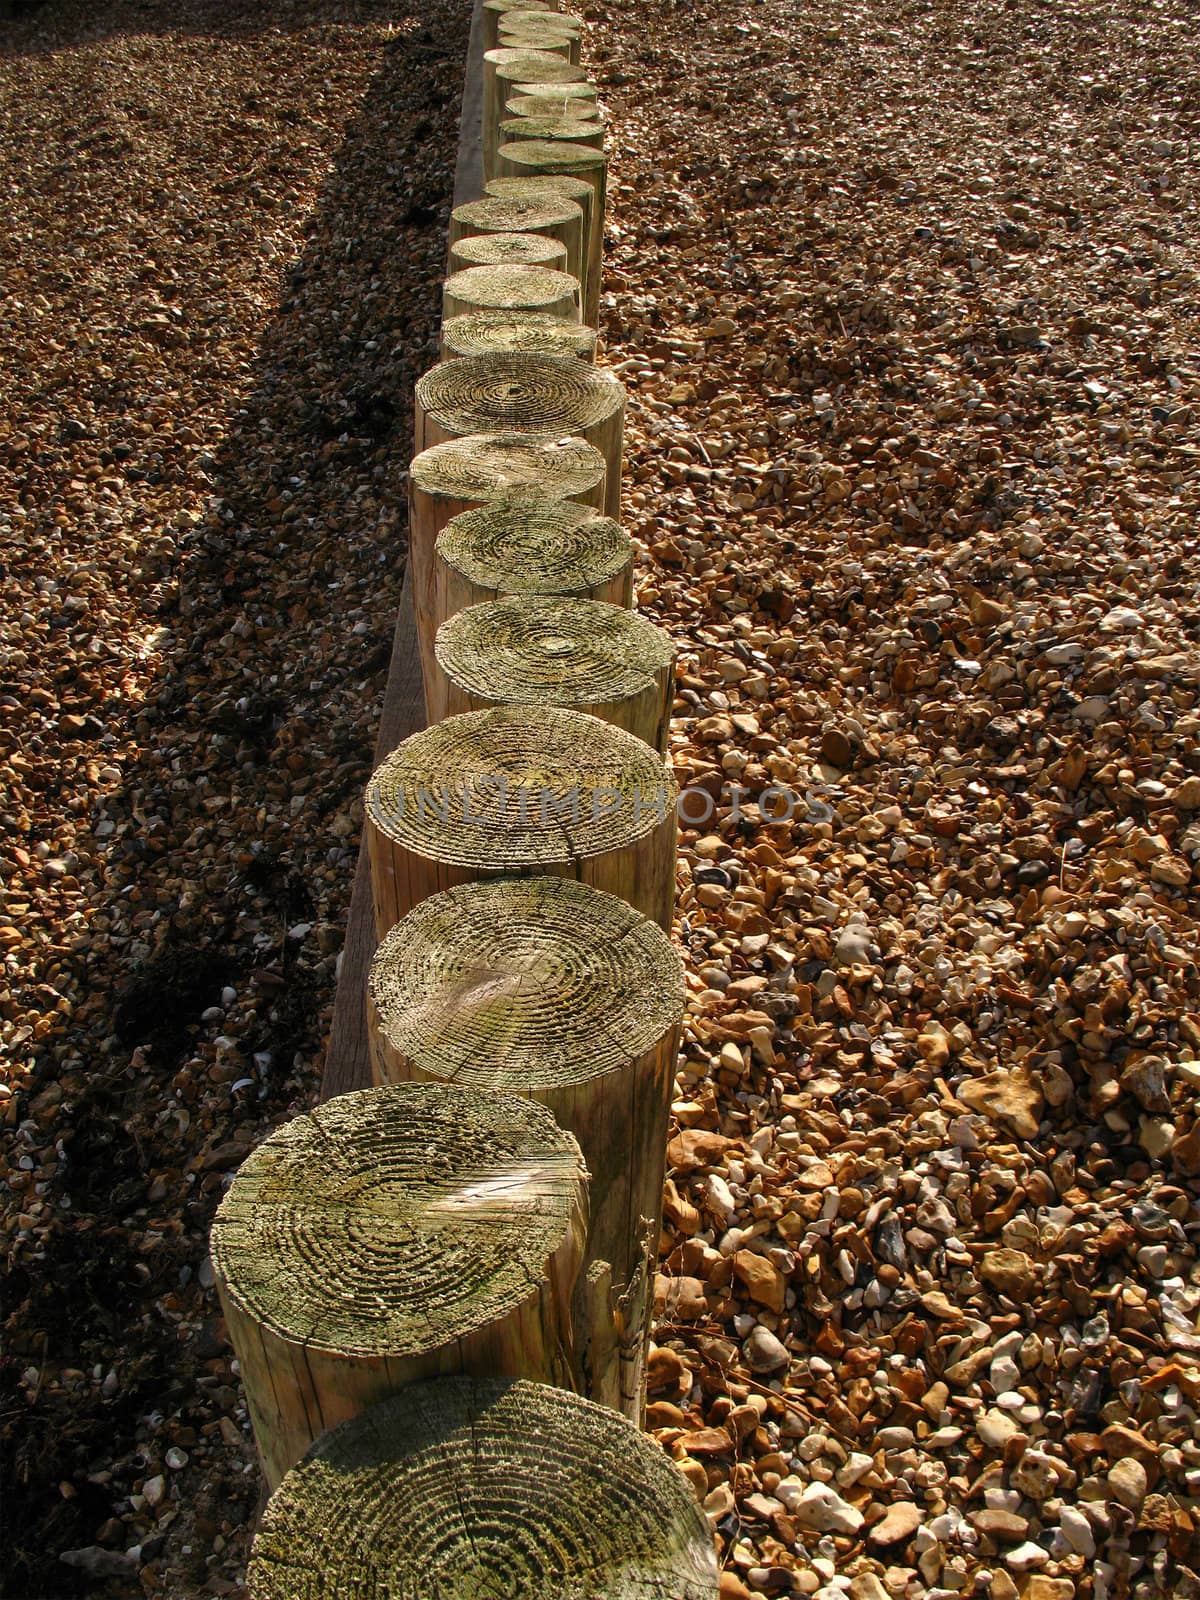 A row of wooden posts on a pebbled beach

